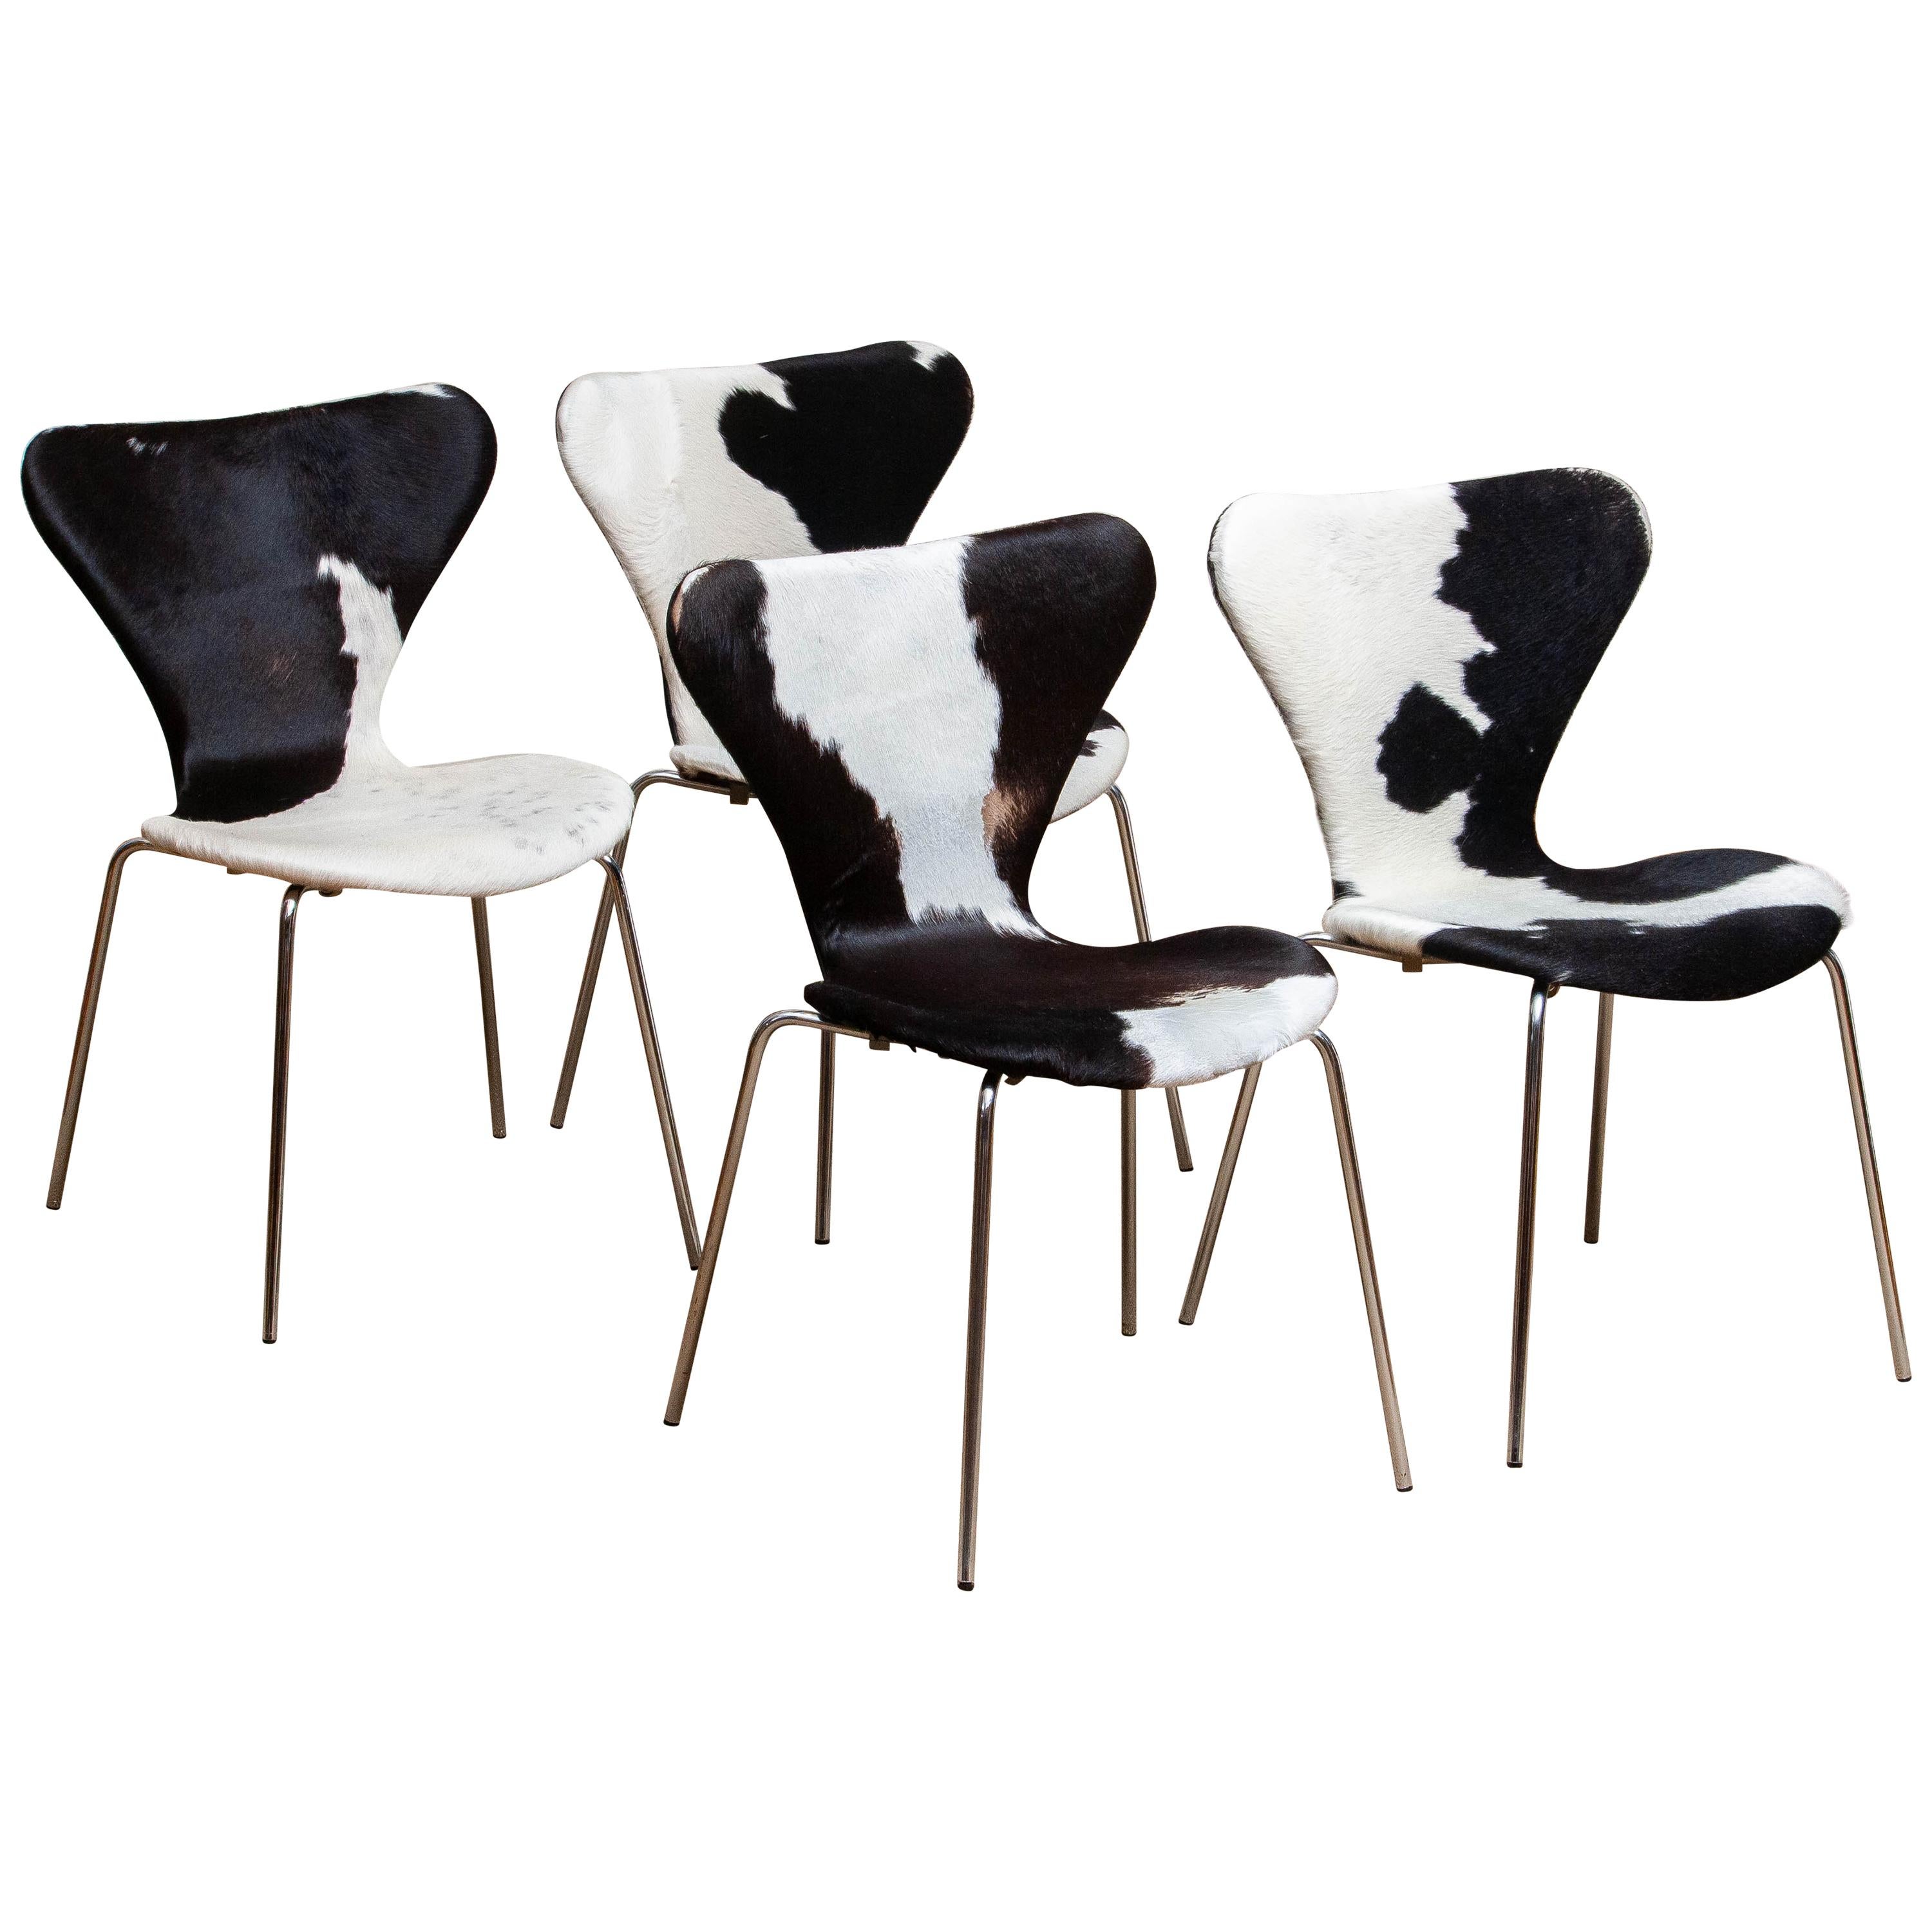 Extremely beautiful set of four dining chairs (model 3107) by Arne Jacobsen and Fritz Hansen.
These chairs have a cowhide fur seating and backrest on a chrome frame.
They are in a very nice and original condition.
Period 1970s.

 